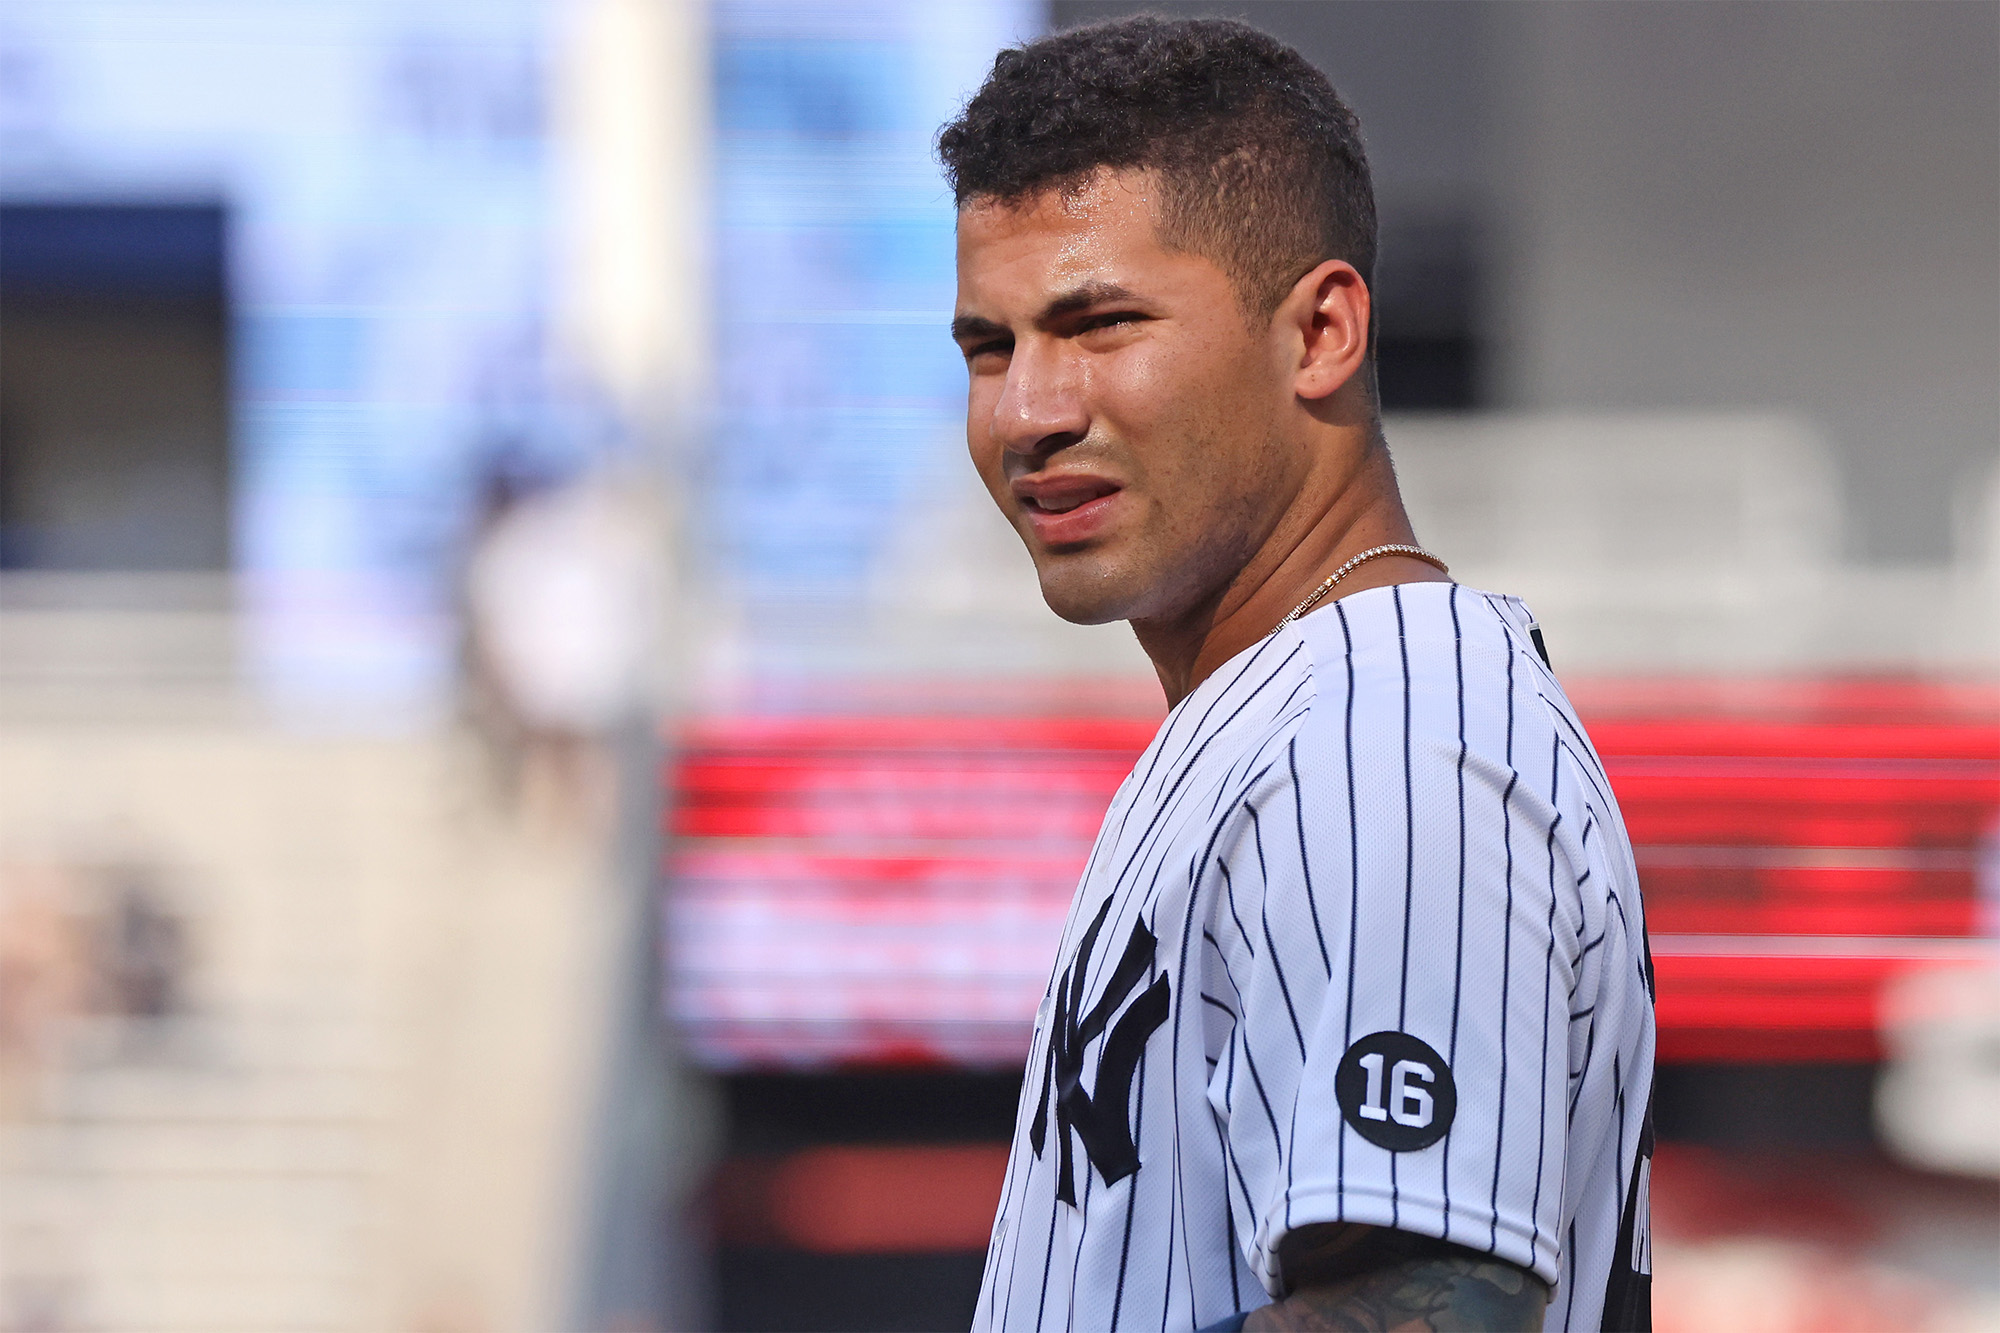 The Yankees Gleyber Torres Conundrum and WHY ITS BELIEVED HE WILL BE TRADED This Offseason